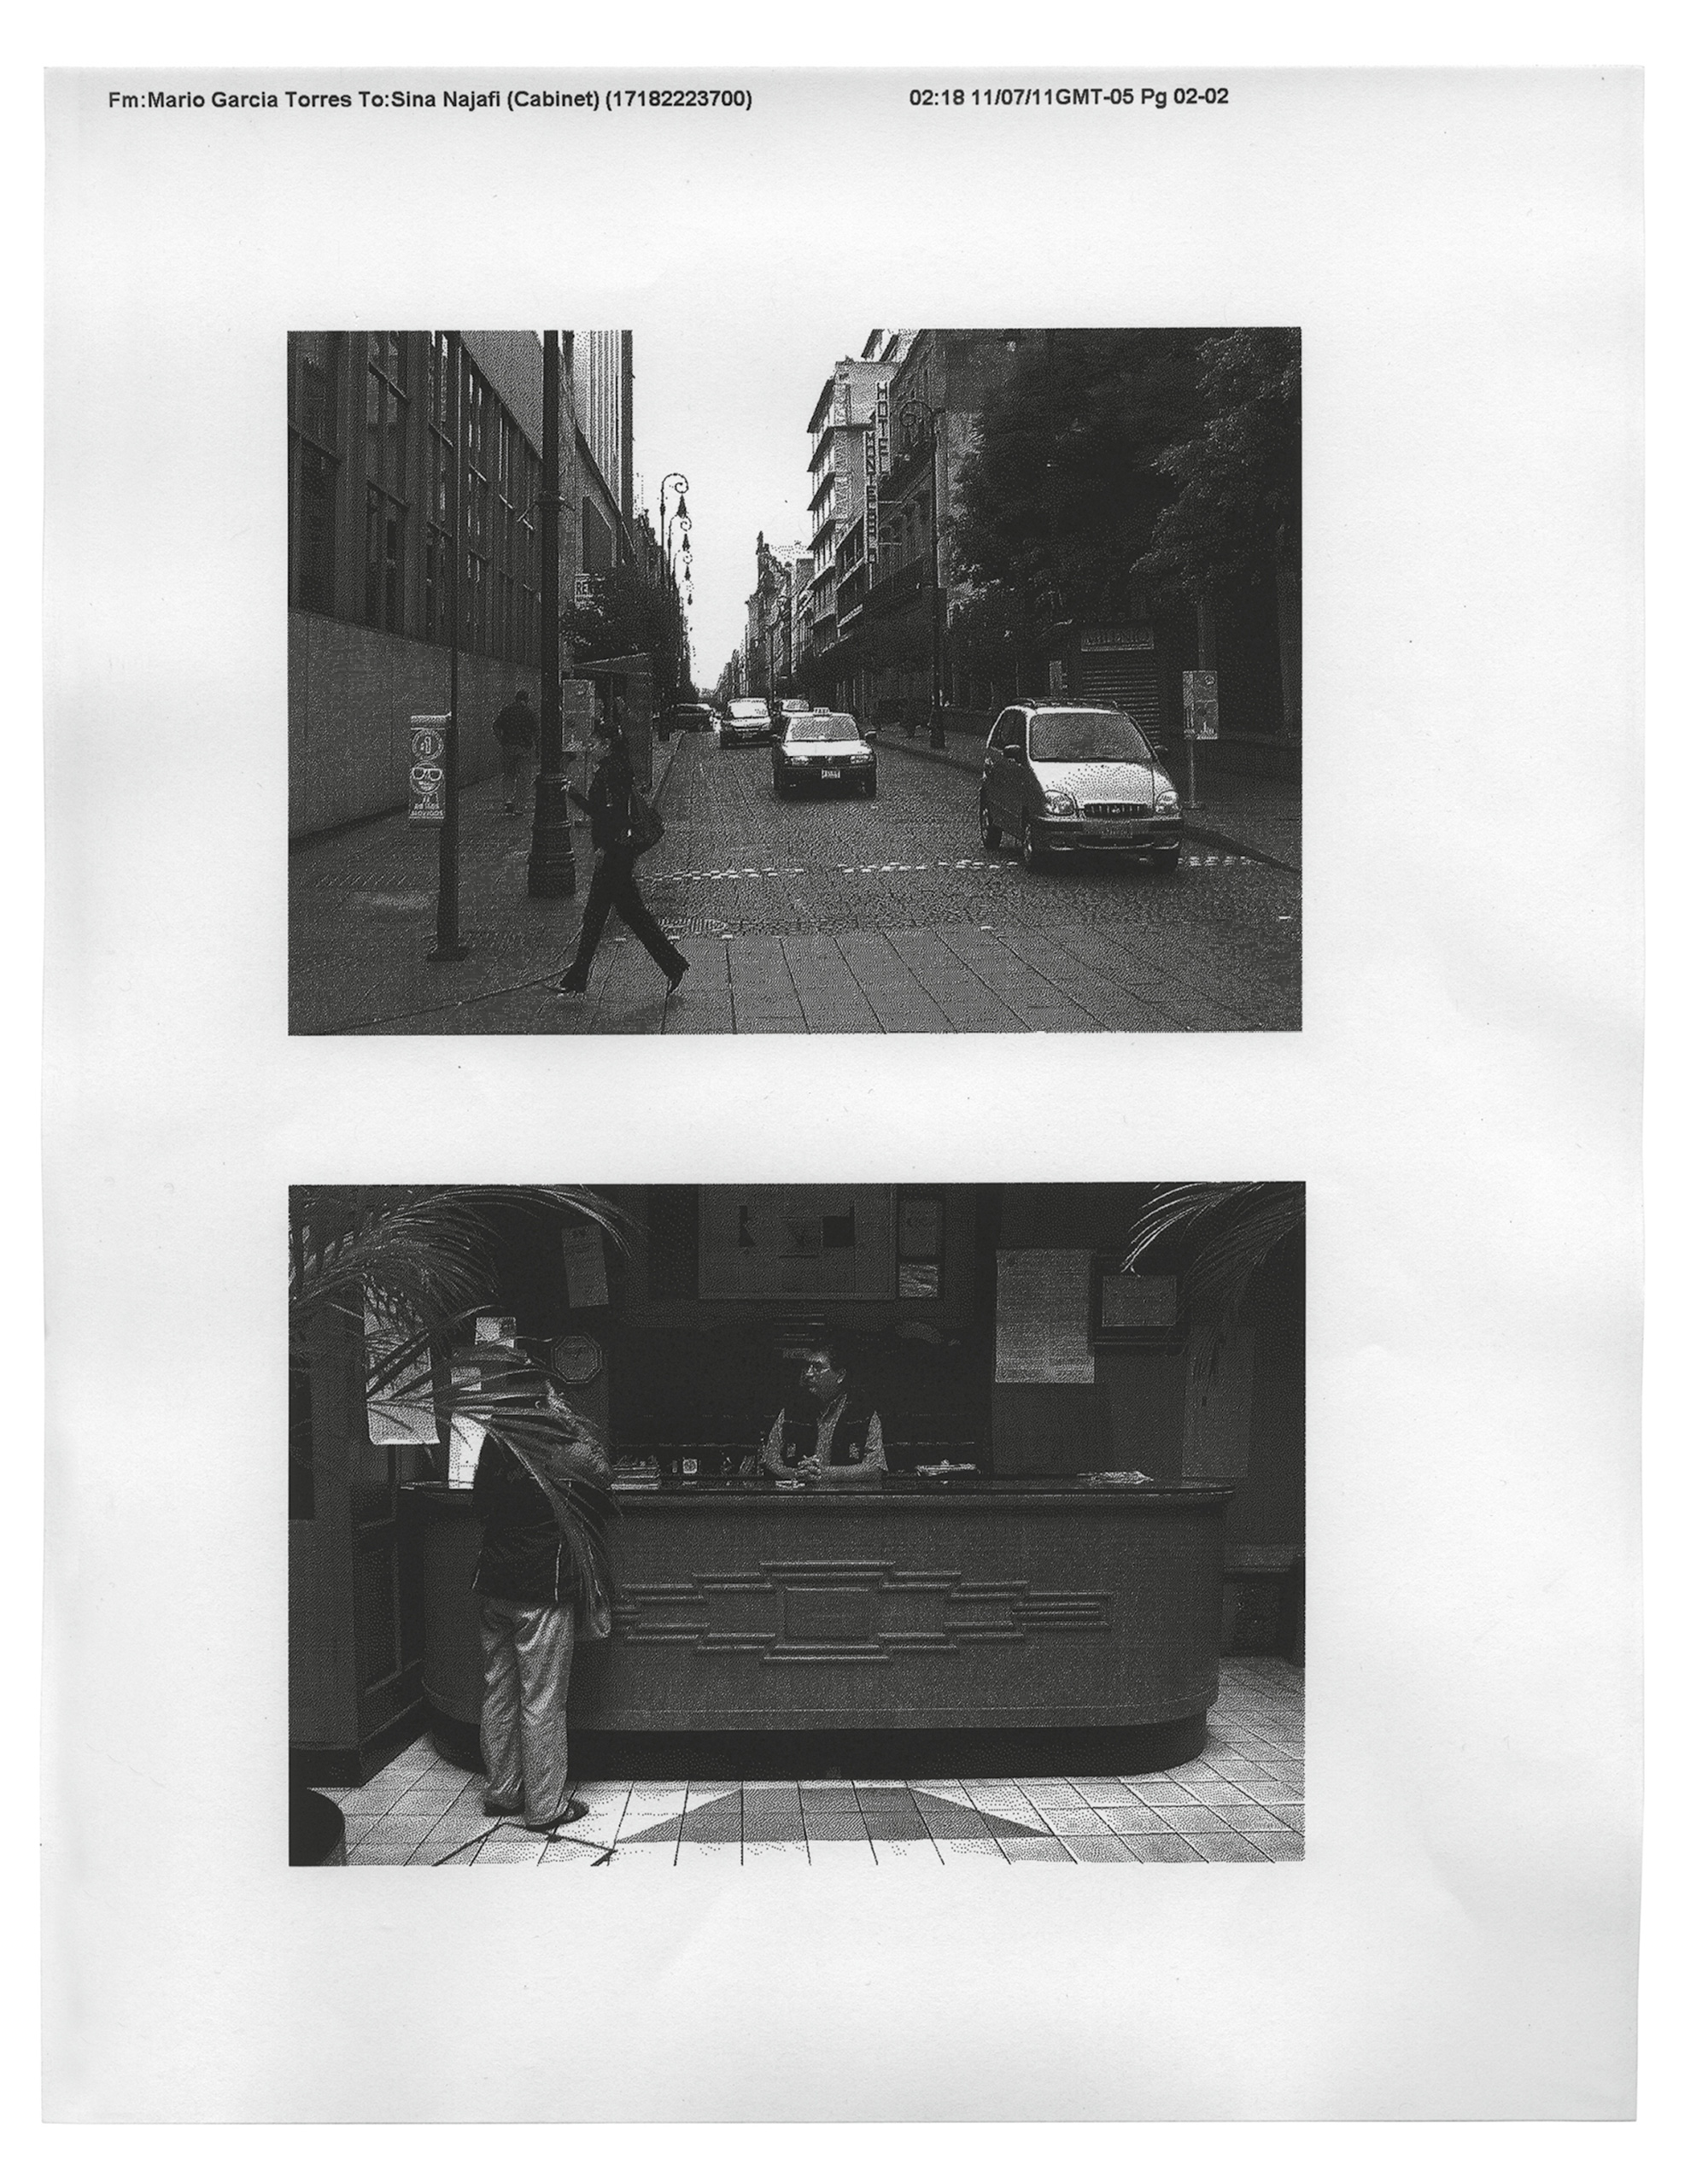 A page from Mario Garcia Torres’s twenty eleven artwork “Notes for the Disjunction of Time,” featuring two photographs—one a street scene, the other what looks to be a hotel lobby. 